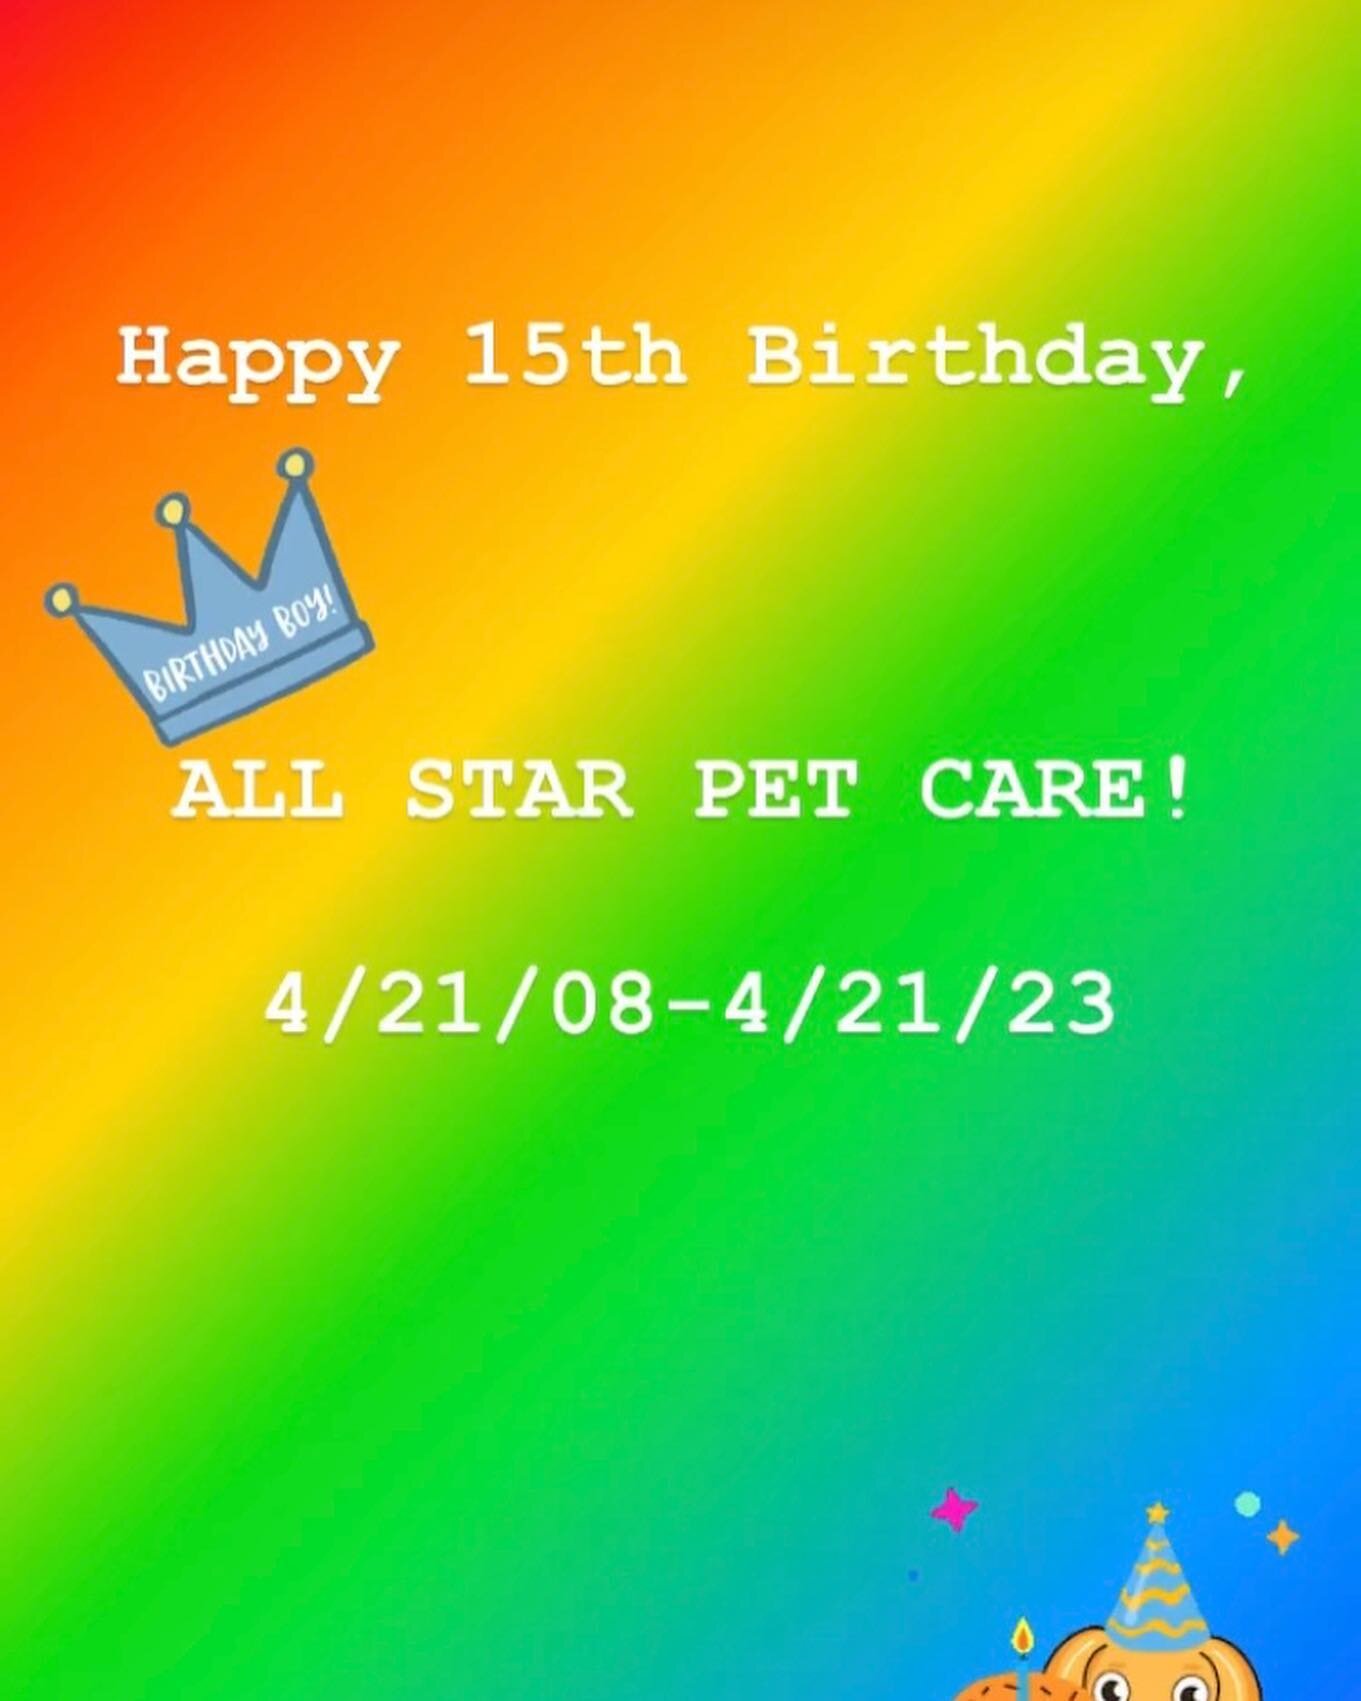 Today All Star celebrates 15 years in business. We appreciate all the support❤️ Happy Friday!😊🐶

#Chicagodog #chicagodogs #chicagodogsofinstagram #chicagodogstagram #chicagodogdaycare #doggydaycare #dogsofinstagram #dogsofinsta #dogsofig #rescuedog